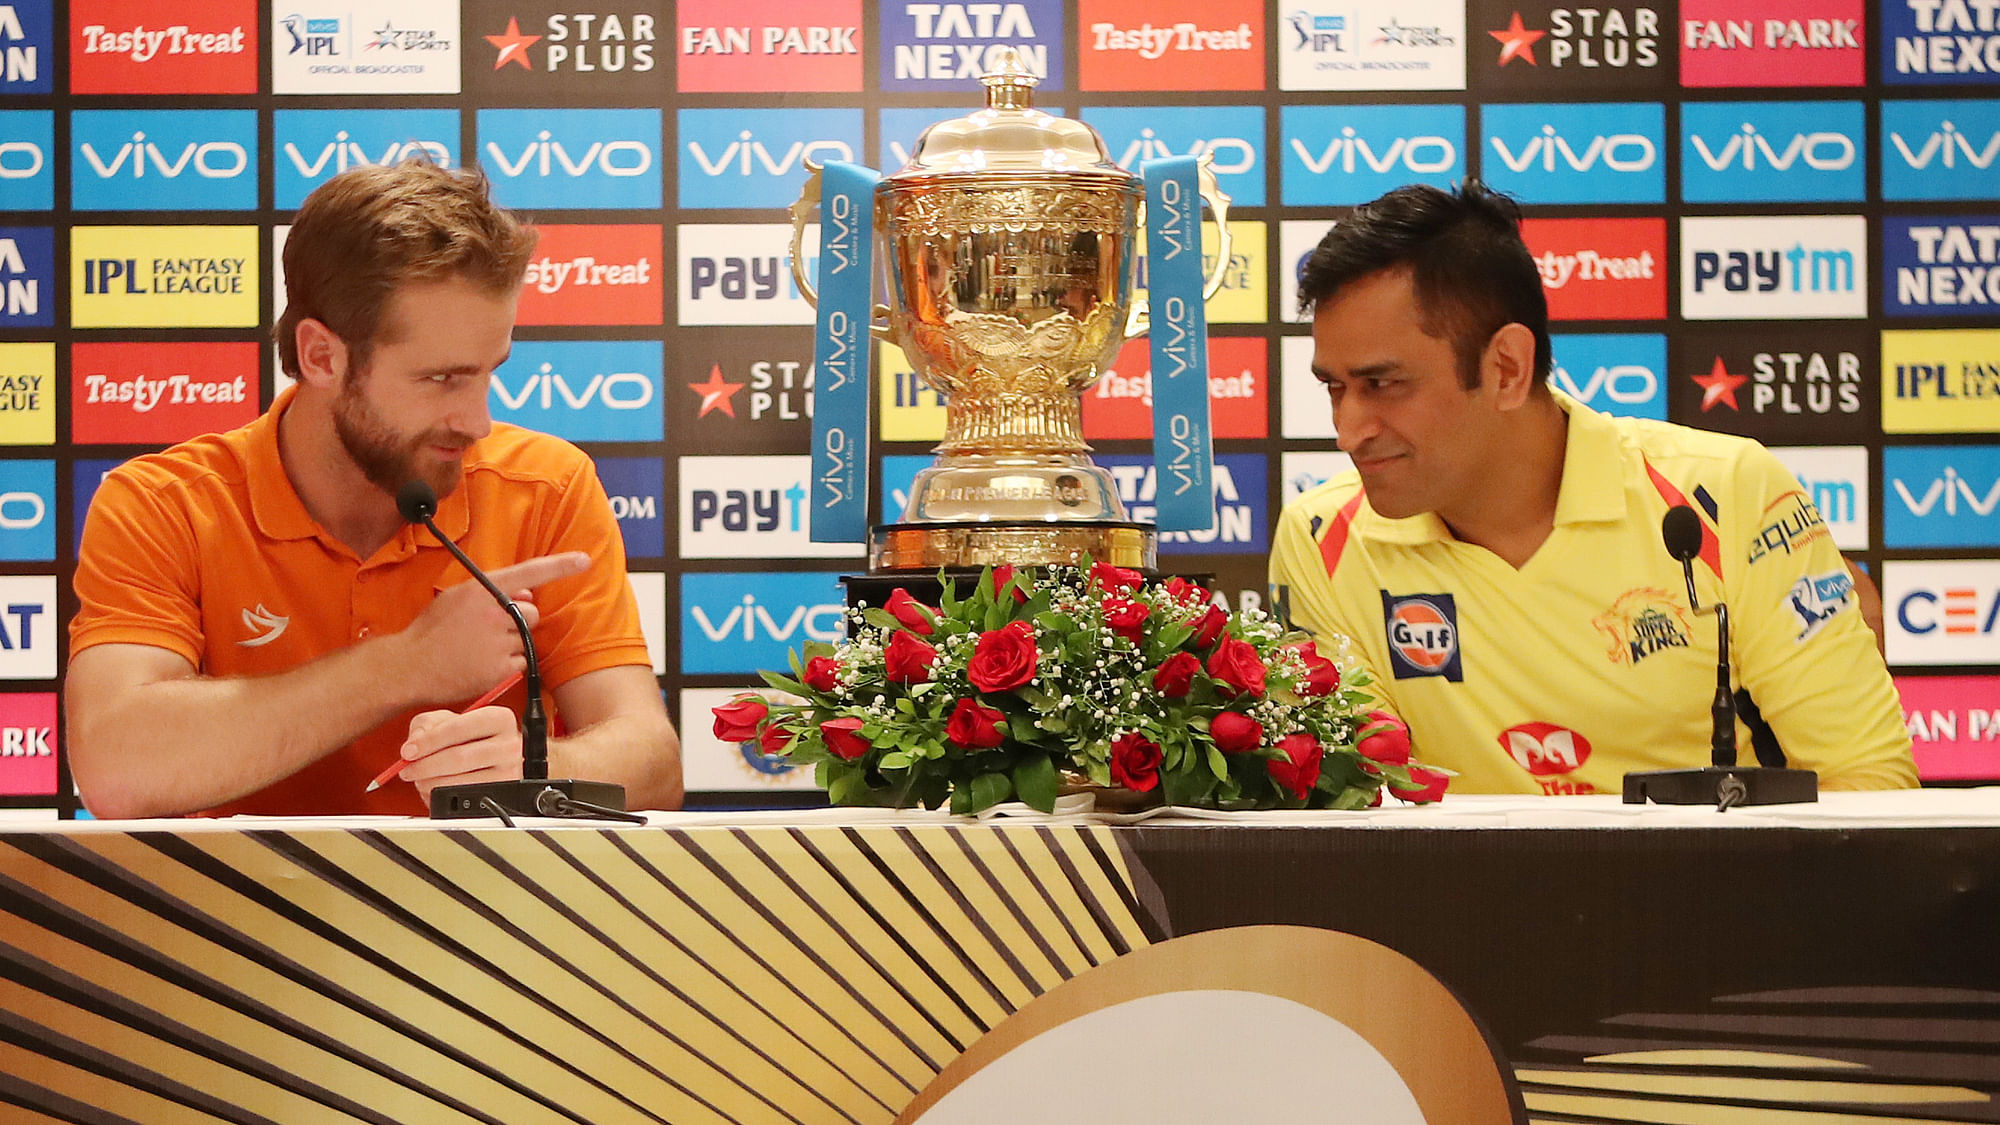 Kane Williamson of the Sunrisers Hyderabad and MS Dhoni of the Chennai Superkings address the media during the Vivo Indian Premier League 2018 (IPL 2018) pre final press conference held at the Trident Hotel in Mumbai on the 26th May 2018.